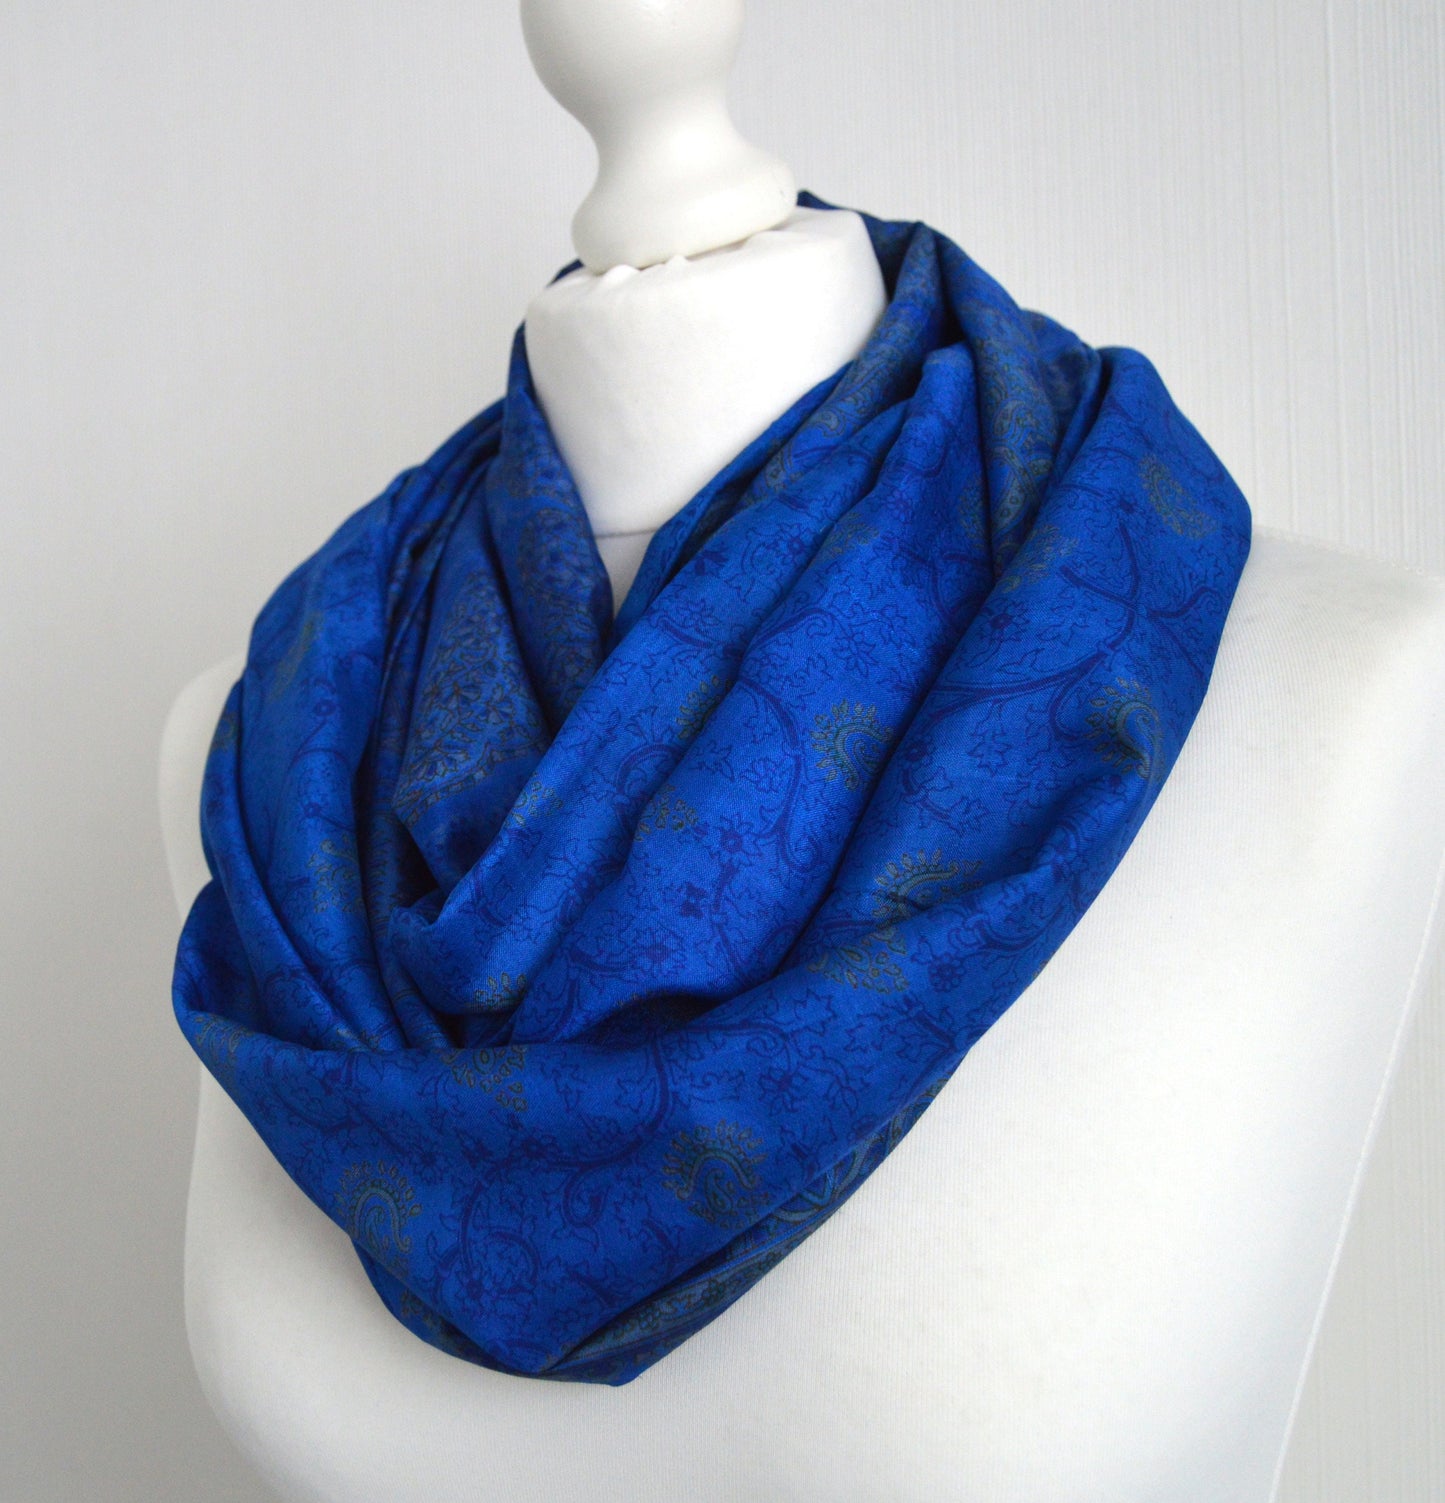 Royal Blue Grey Sari Silk Scarf - Sophisticated Bohemian Eco Friendly Unisex Scarf - Ethical Sustainable Christmas Gift For Her or Him